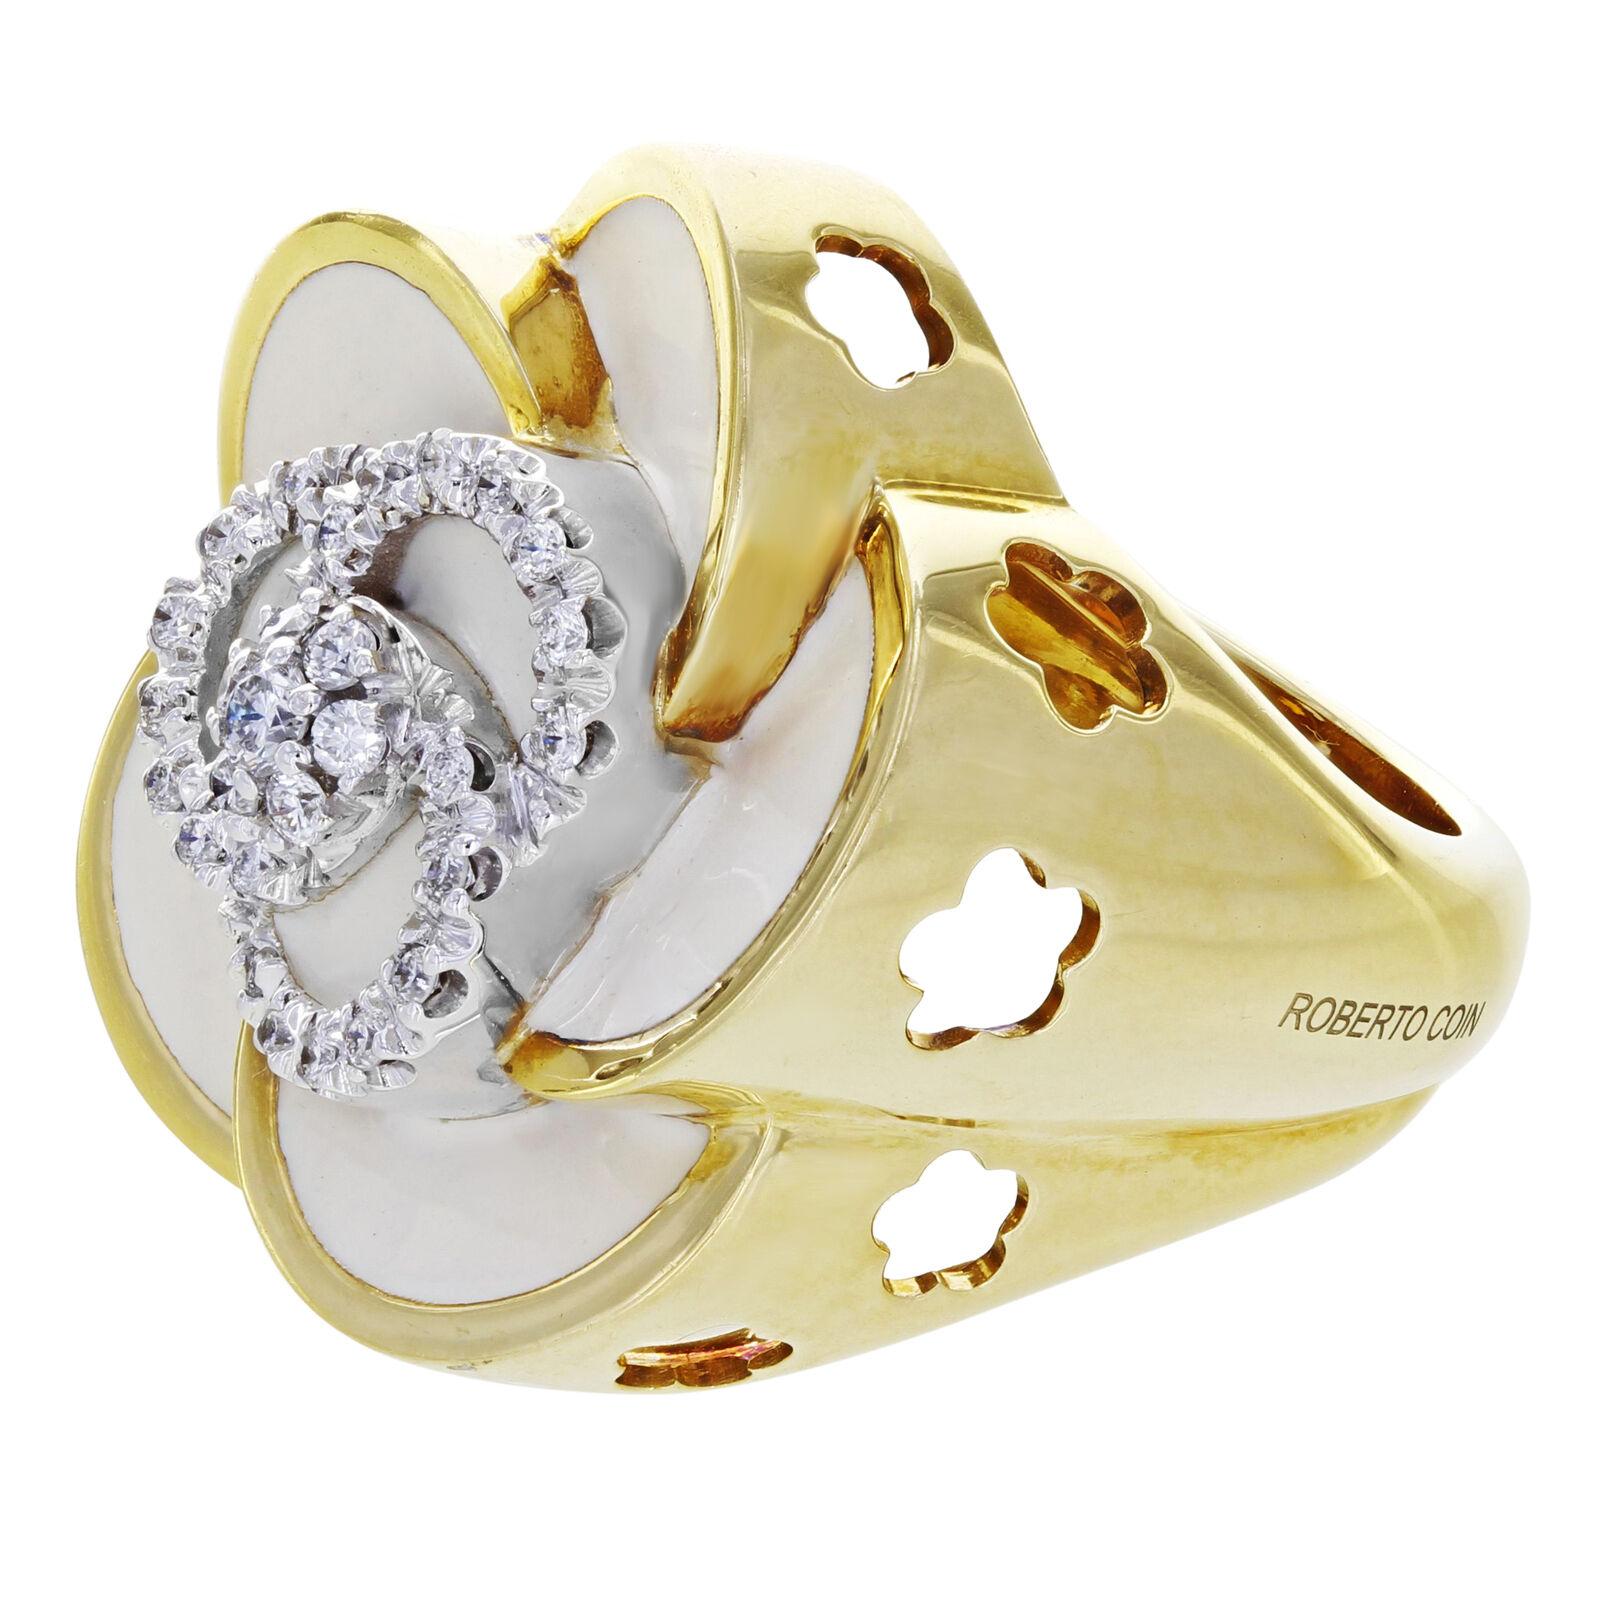 Roberto Coin 18K Yellow Gold Original Diamond Flower Ring.
Weight is 20.3 gram. Ring Size is 6.75.
The condition of the ring is New without tags. It is a right handed or cocktail ring. It is a design of a 5 petal flower coated with white enamel. It